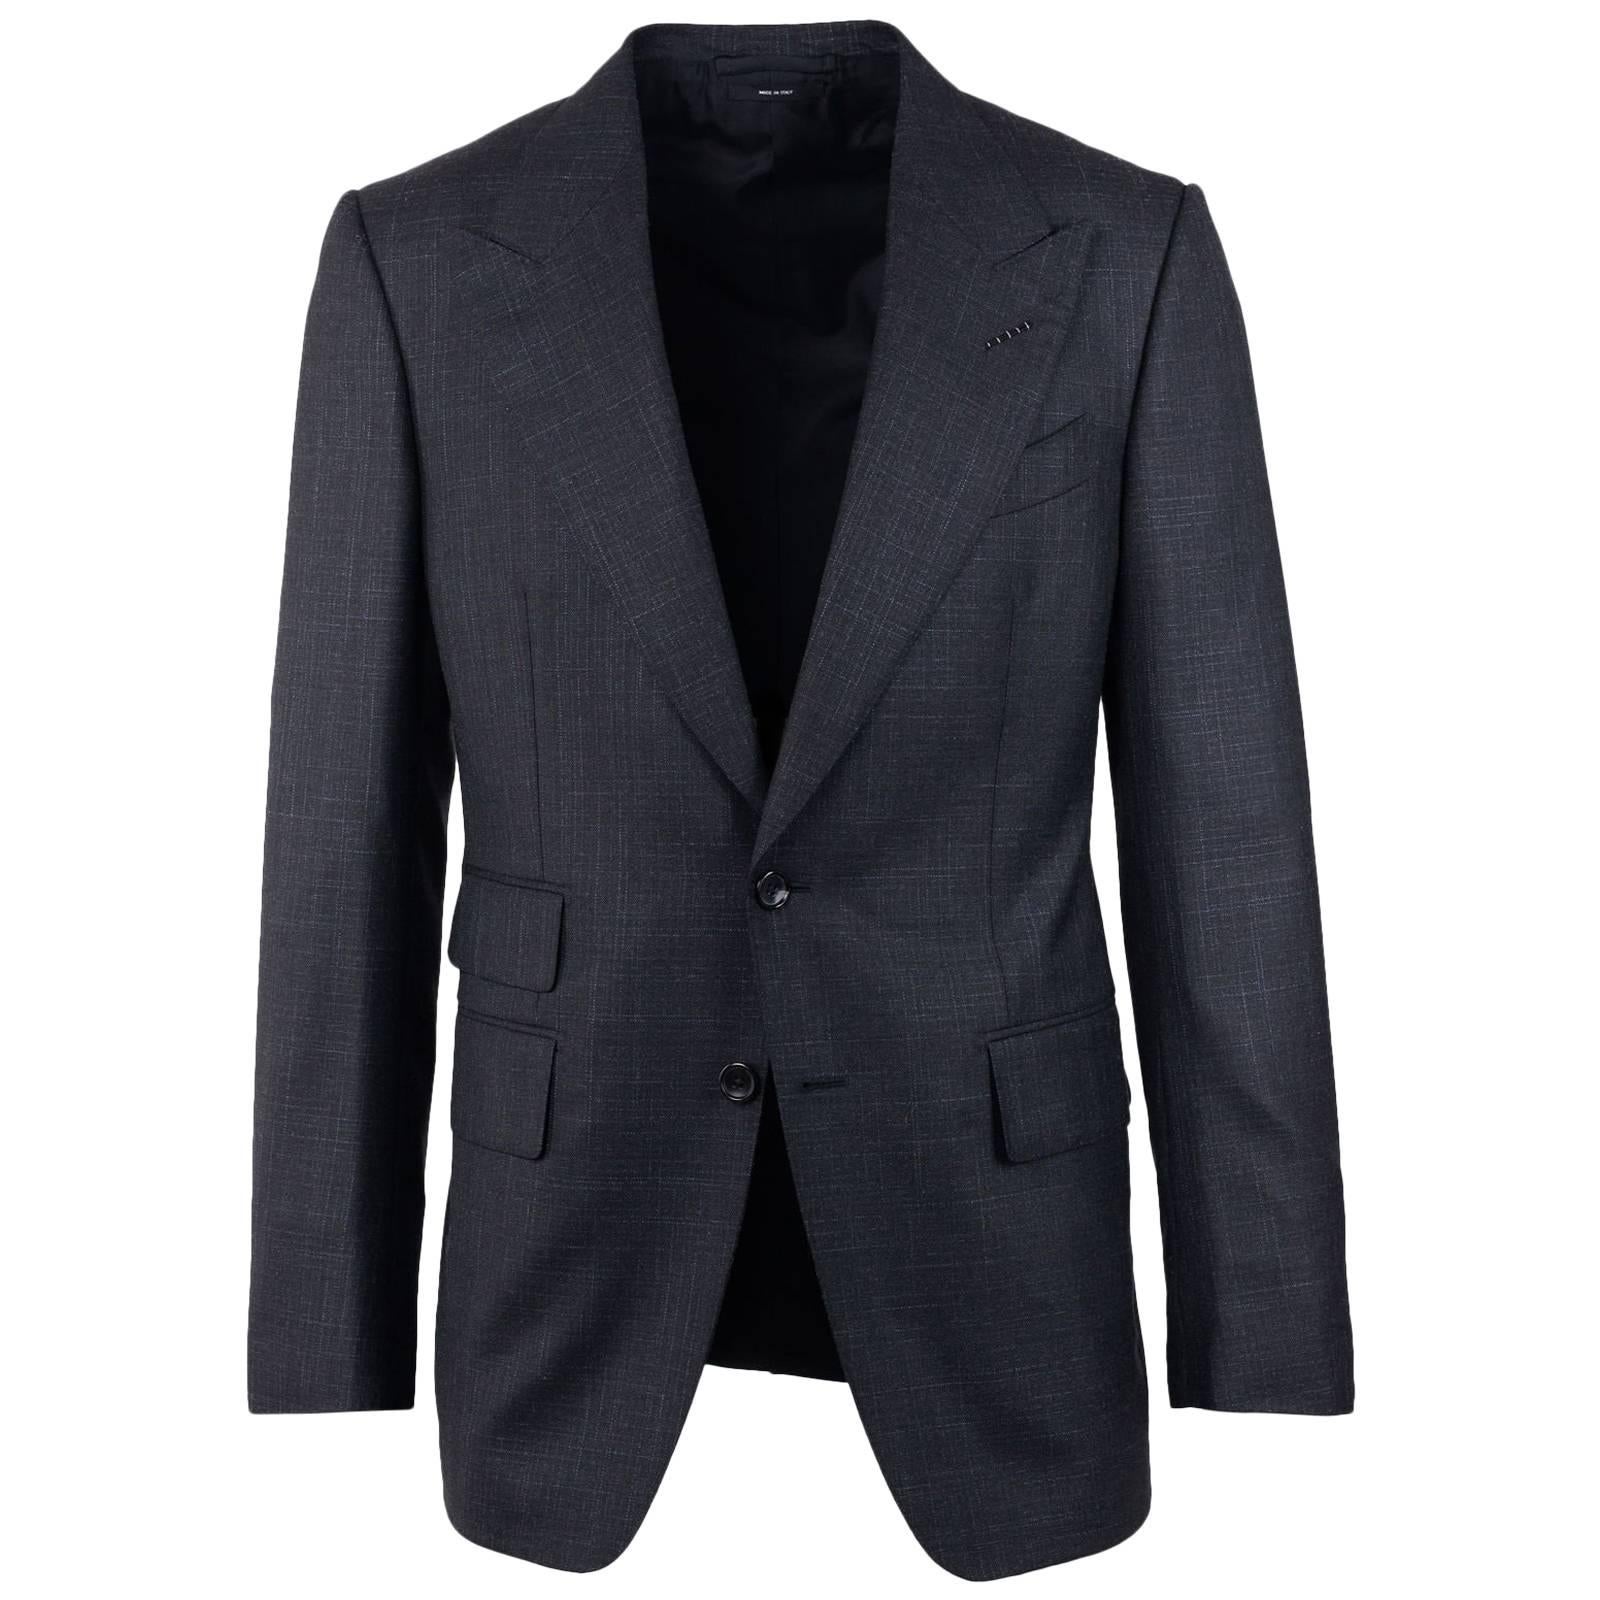 Tom Ford Black Wool Blend Shelton Two Button 2PC Suit For Sale